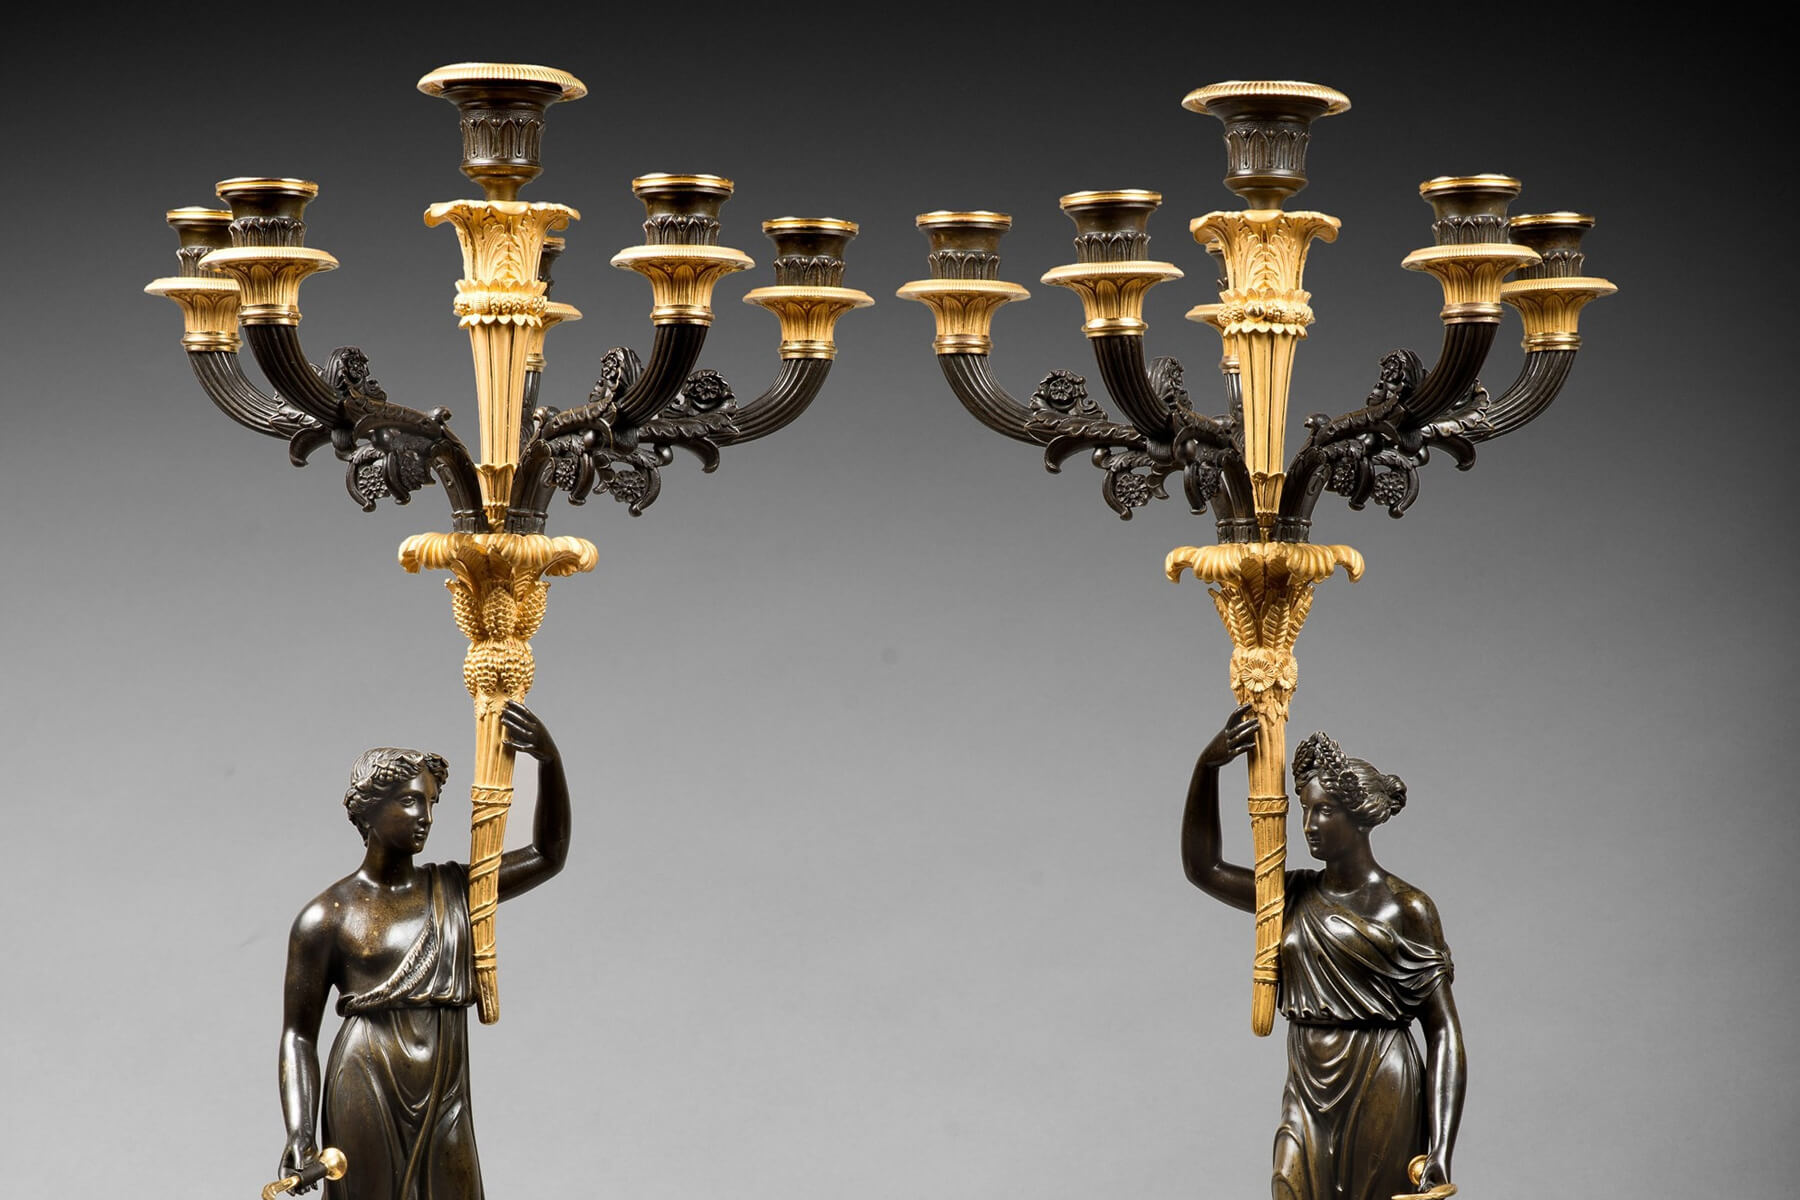 An empire patinated and gilded bronze pair of candelabras